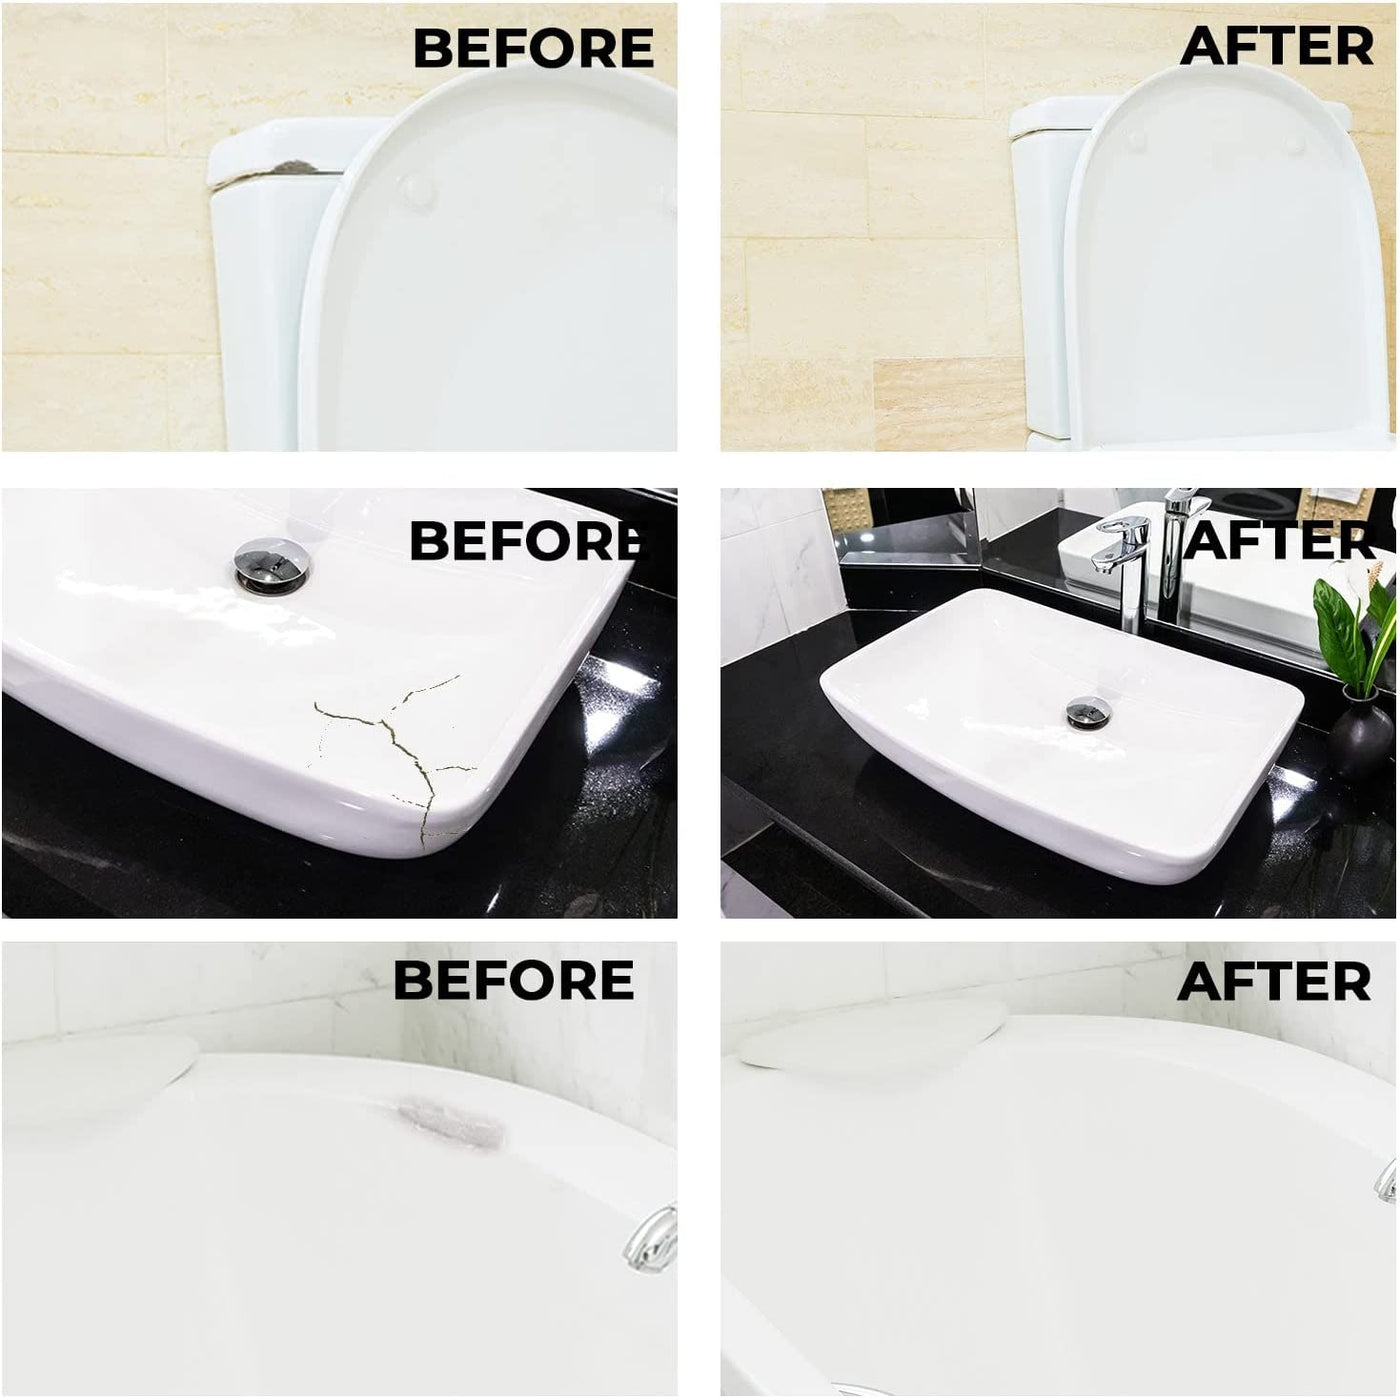 Before and after image of a tub and tile repair using our easy-to-use, all-in-one tub repair kit.